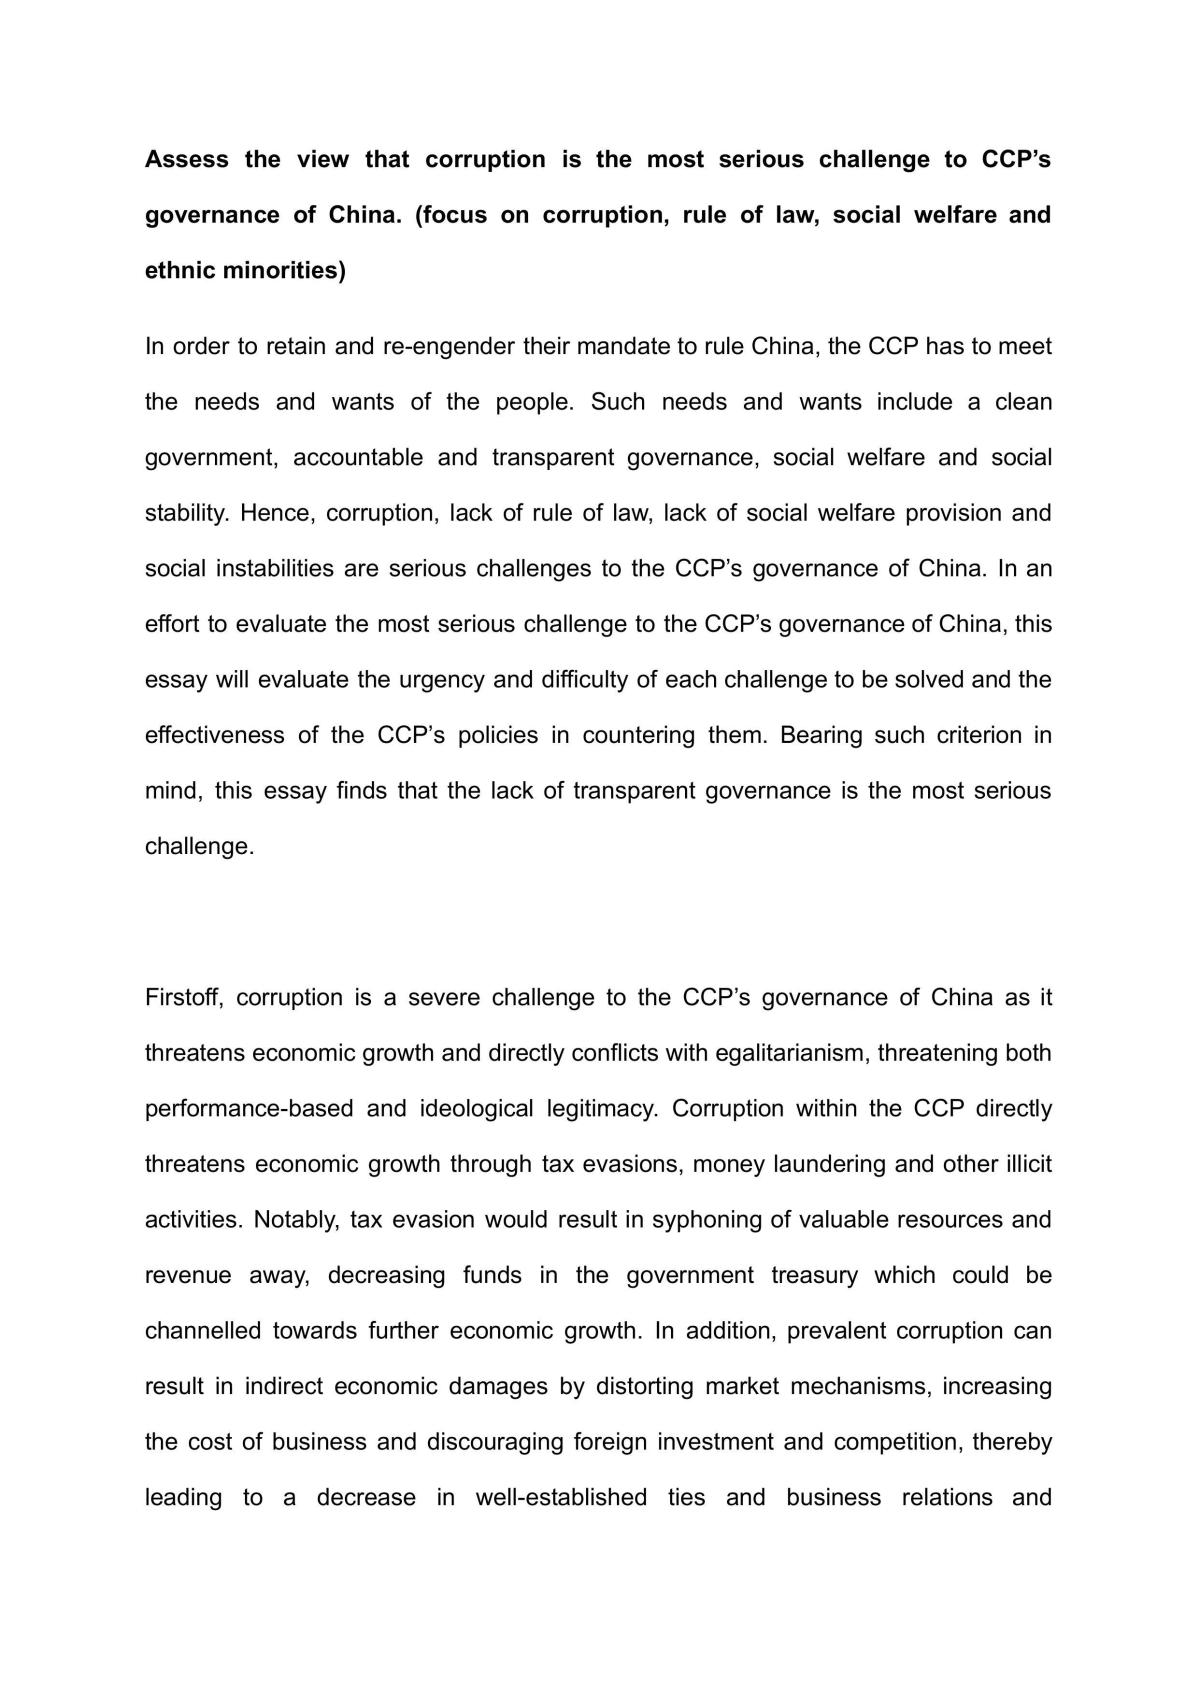 Essay CSE H2 on Challenges of the CCP's governance of China - Page 1